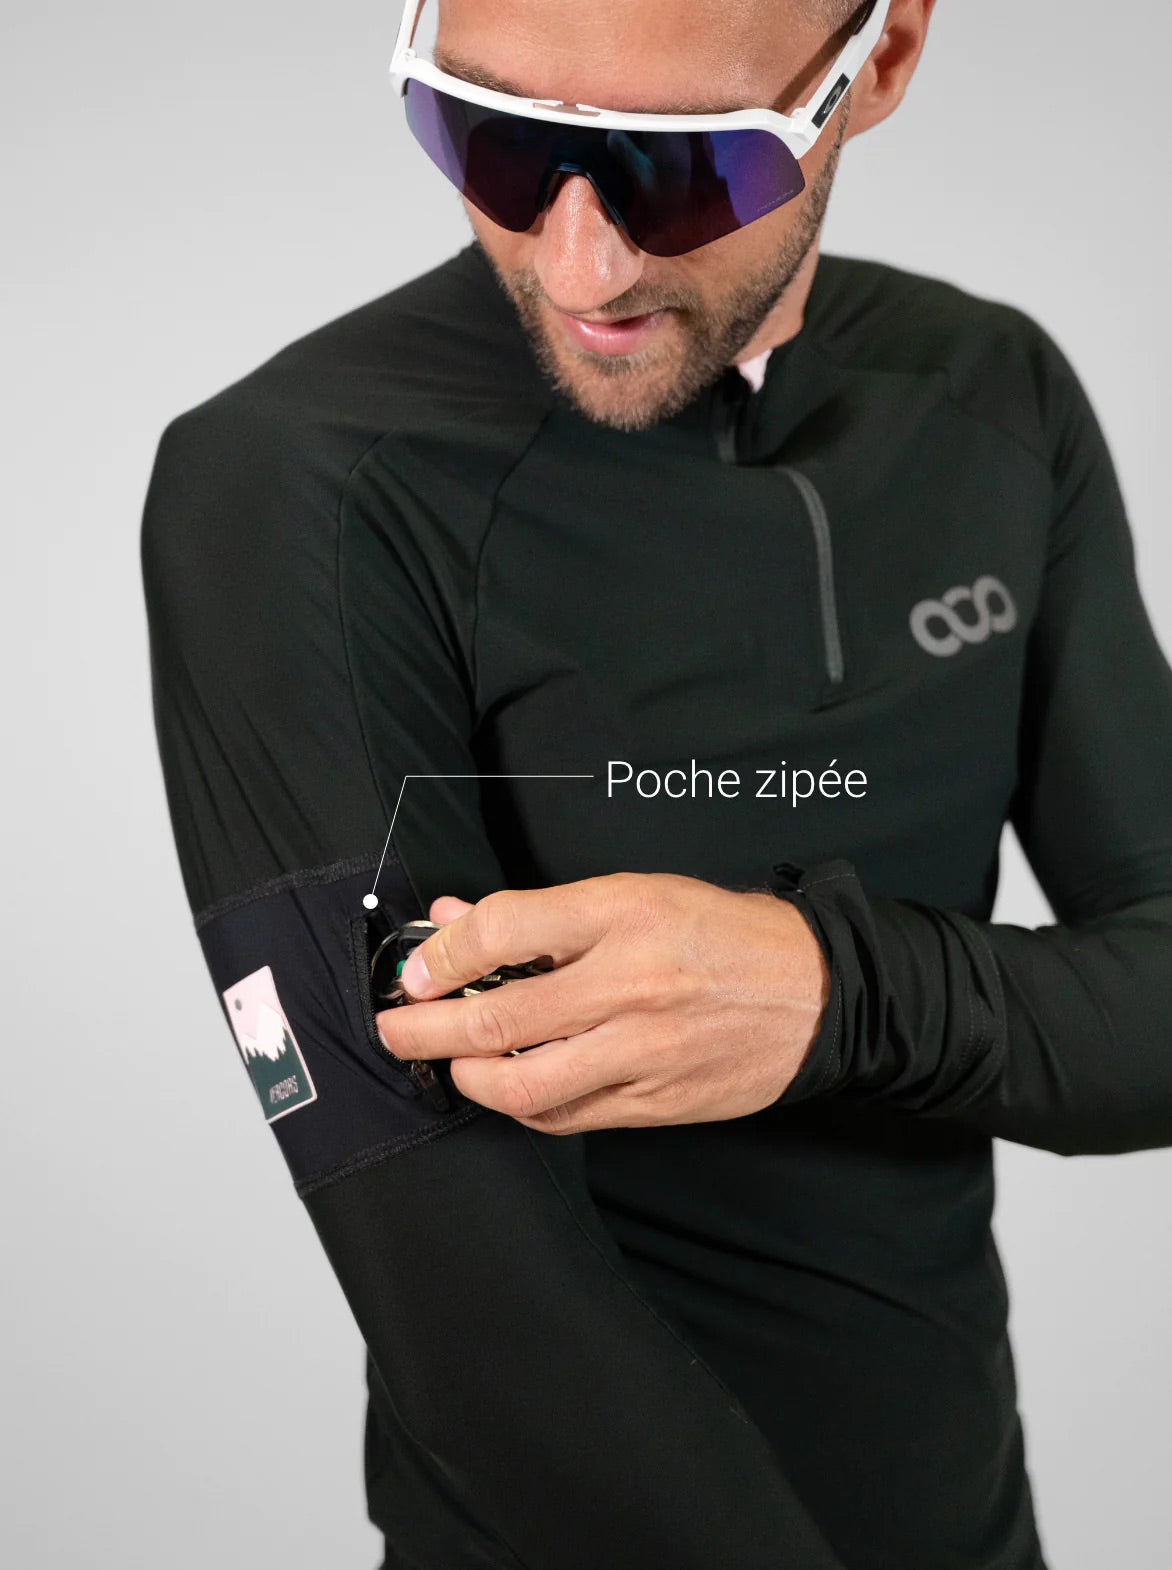 Polaire Zippée Running Homme - Vert sapin - Archive Sales